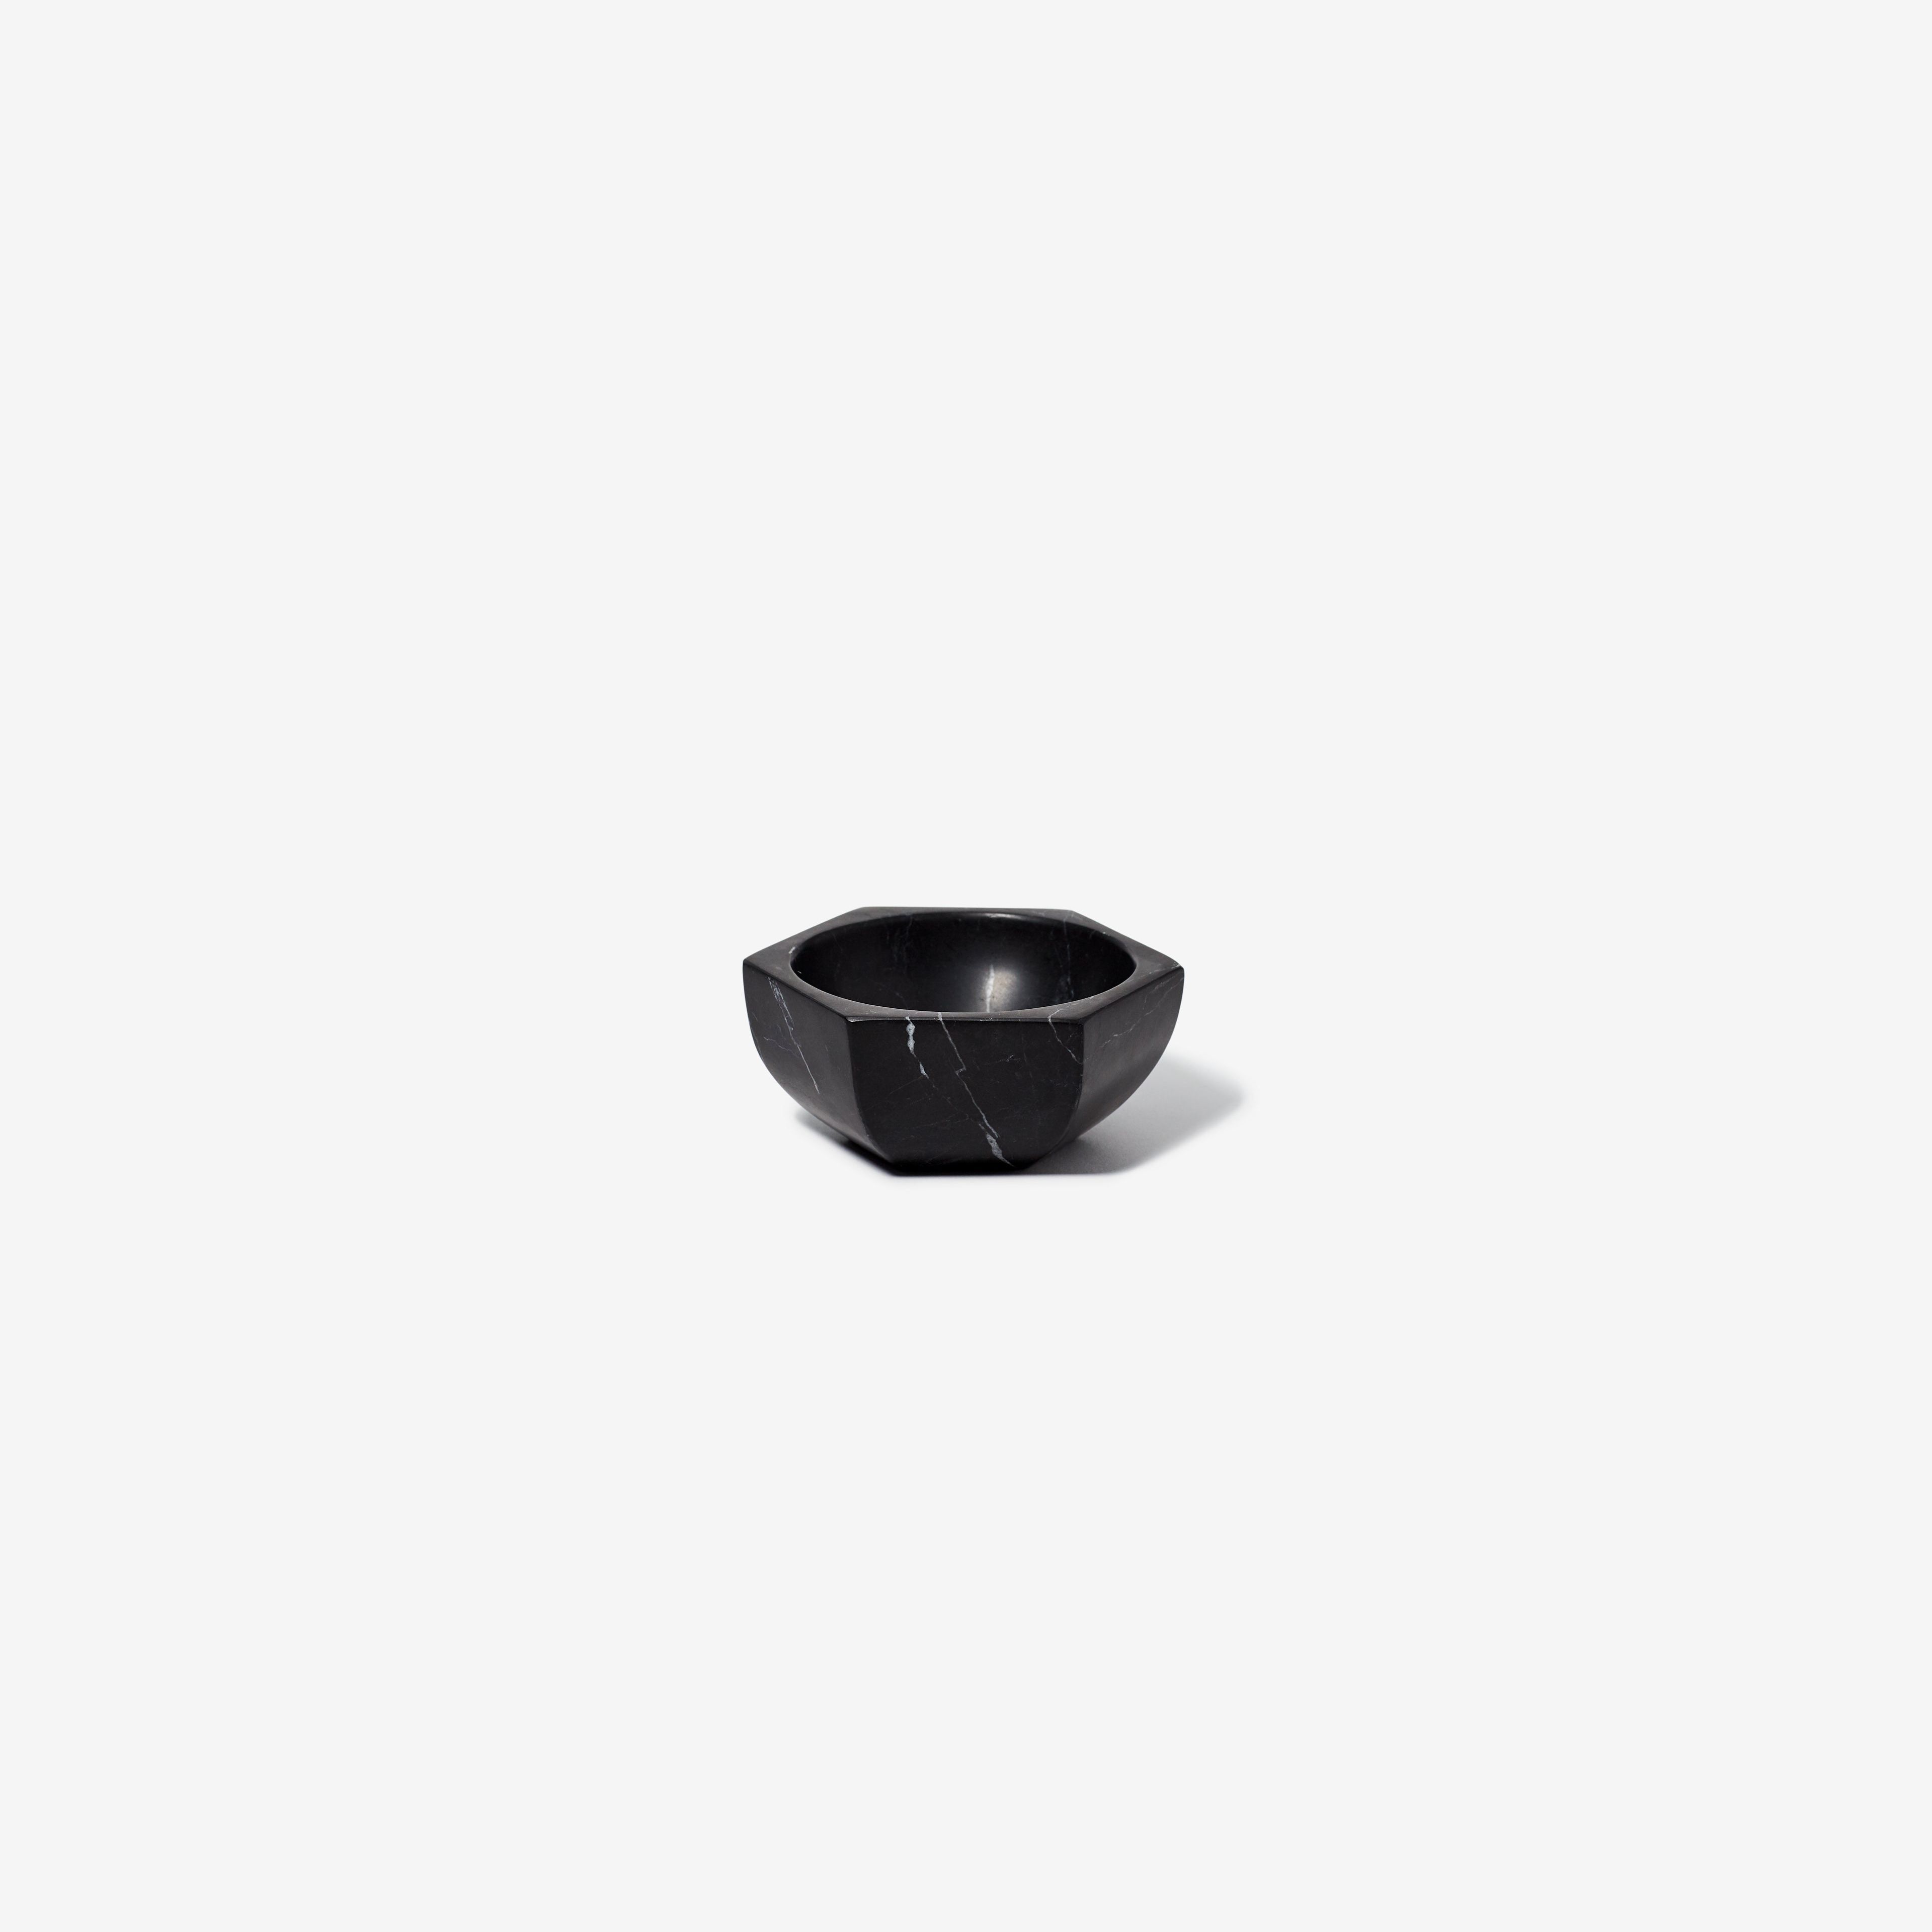 Marble Accent Bowl